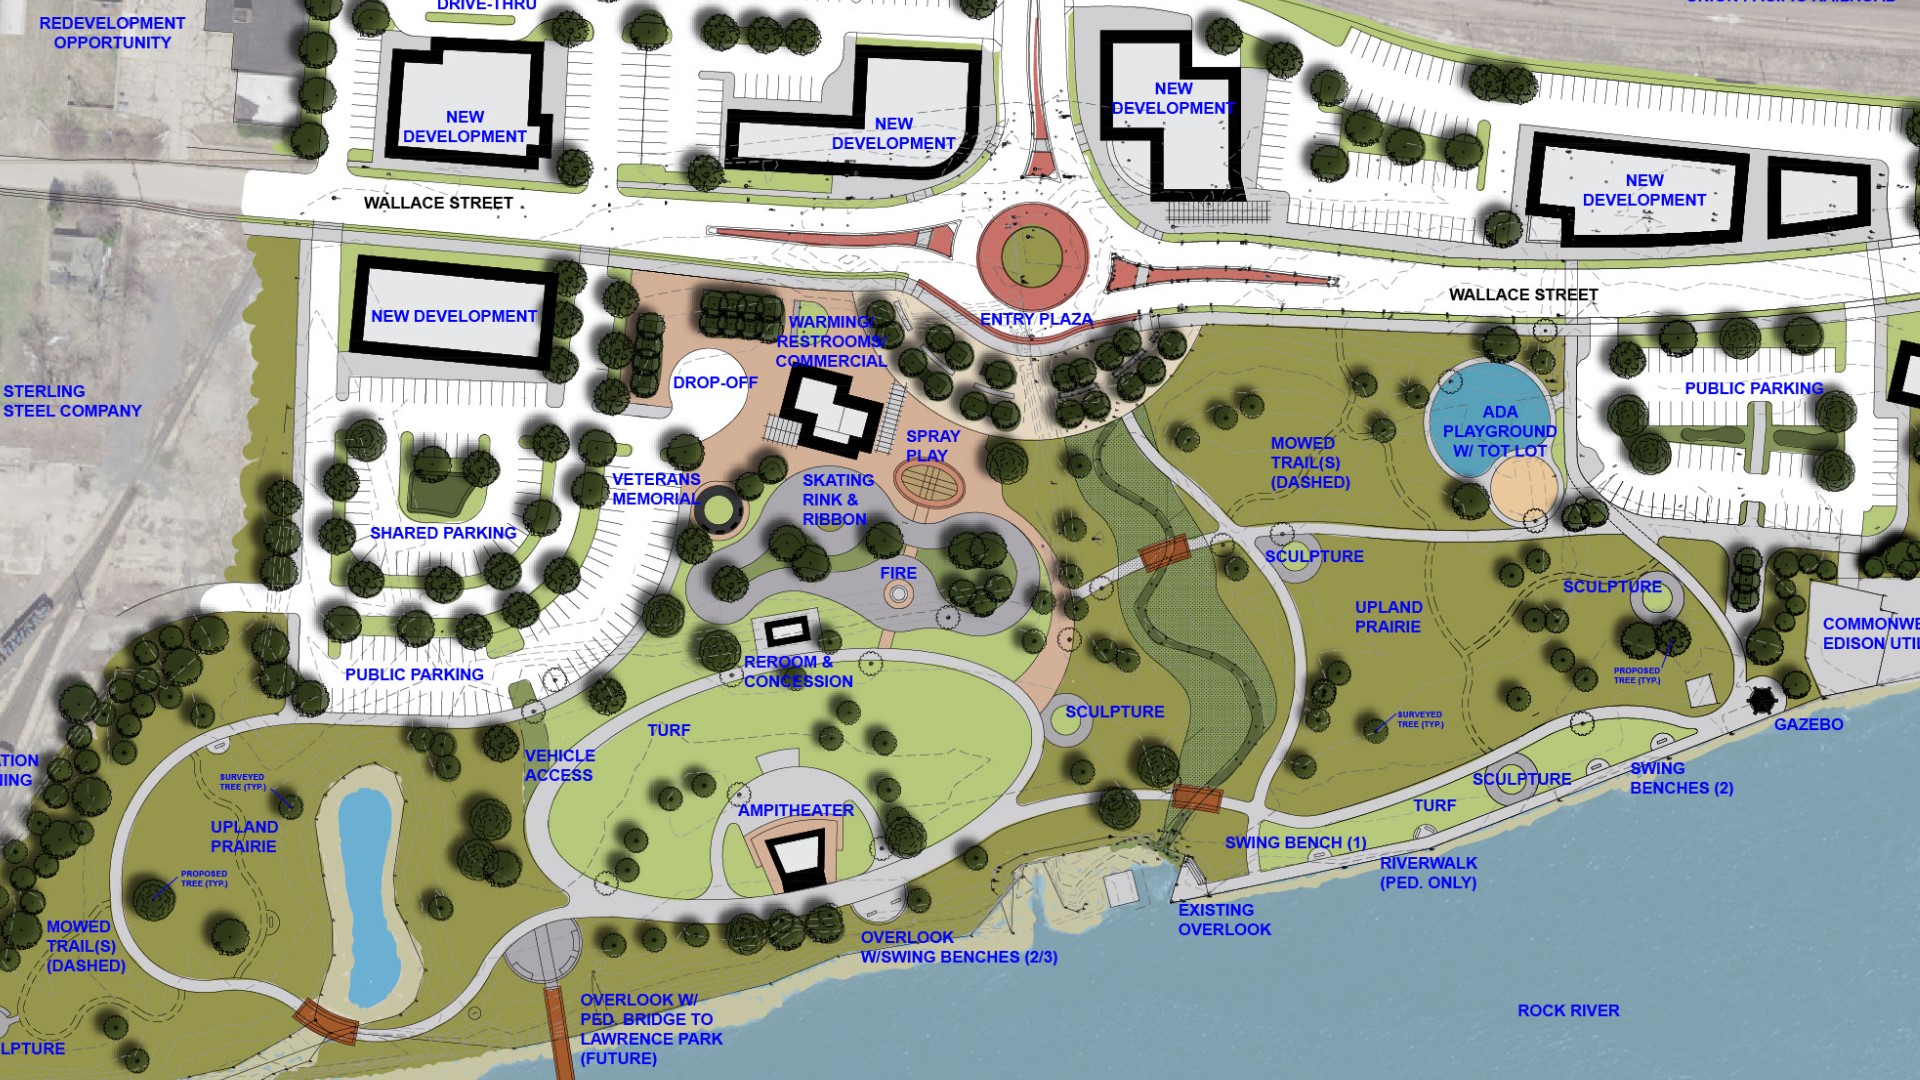 The park would include a walking path, amphitheater, skating rink, and more